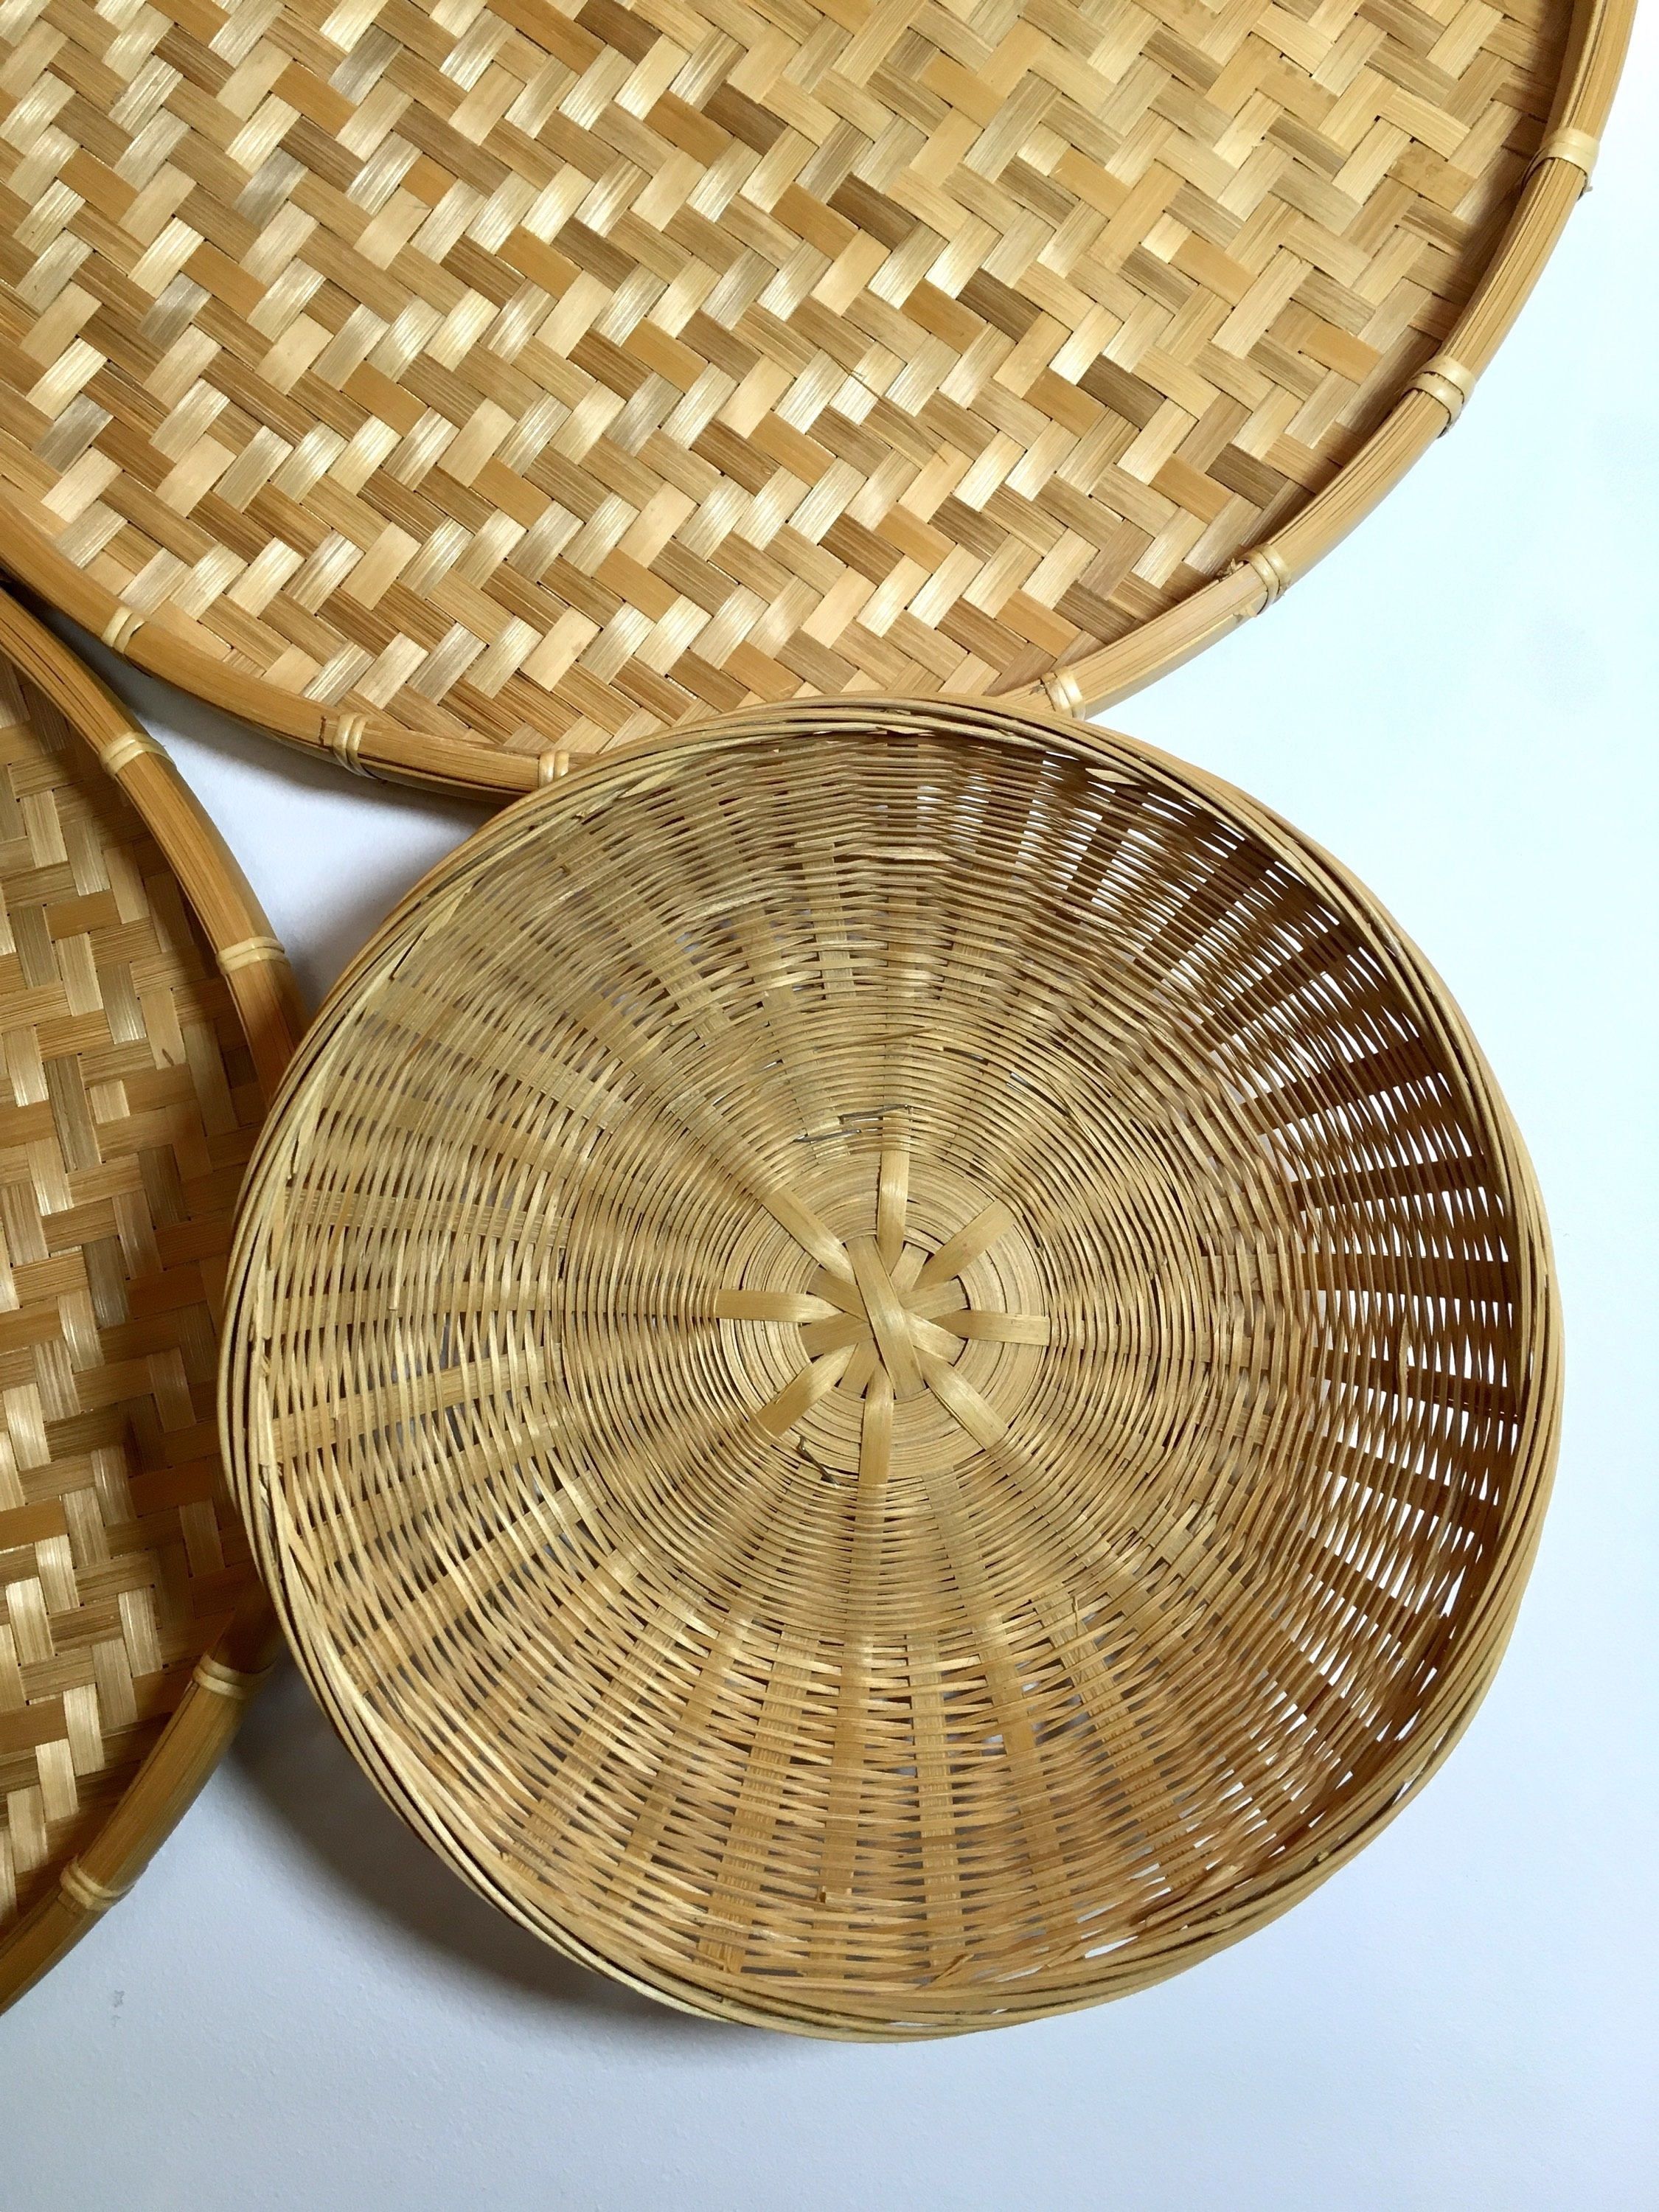 Rattan Wicker Basket Wall Art Collection Vintage 1970s Wooden Wood Pertaining To Woven Basket Wall Art (View 17 of 20)